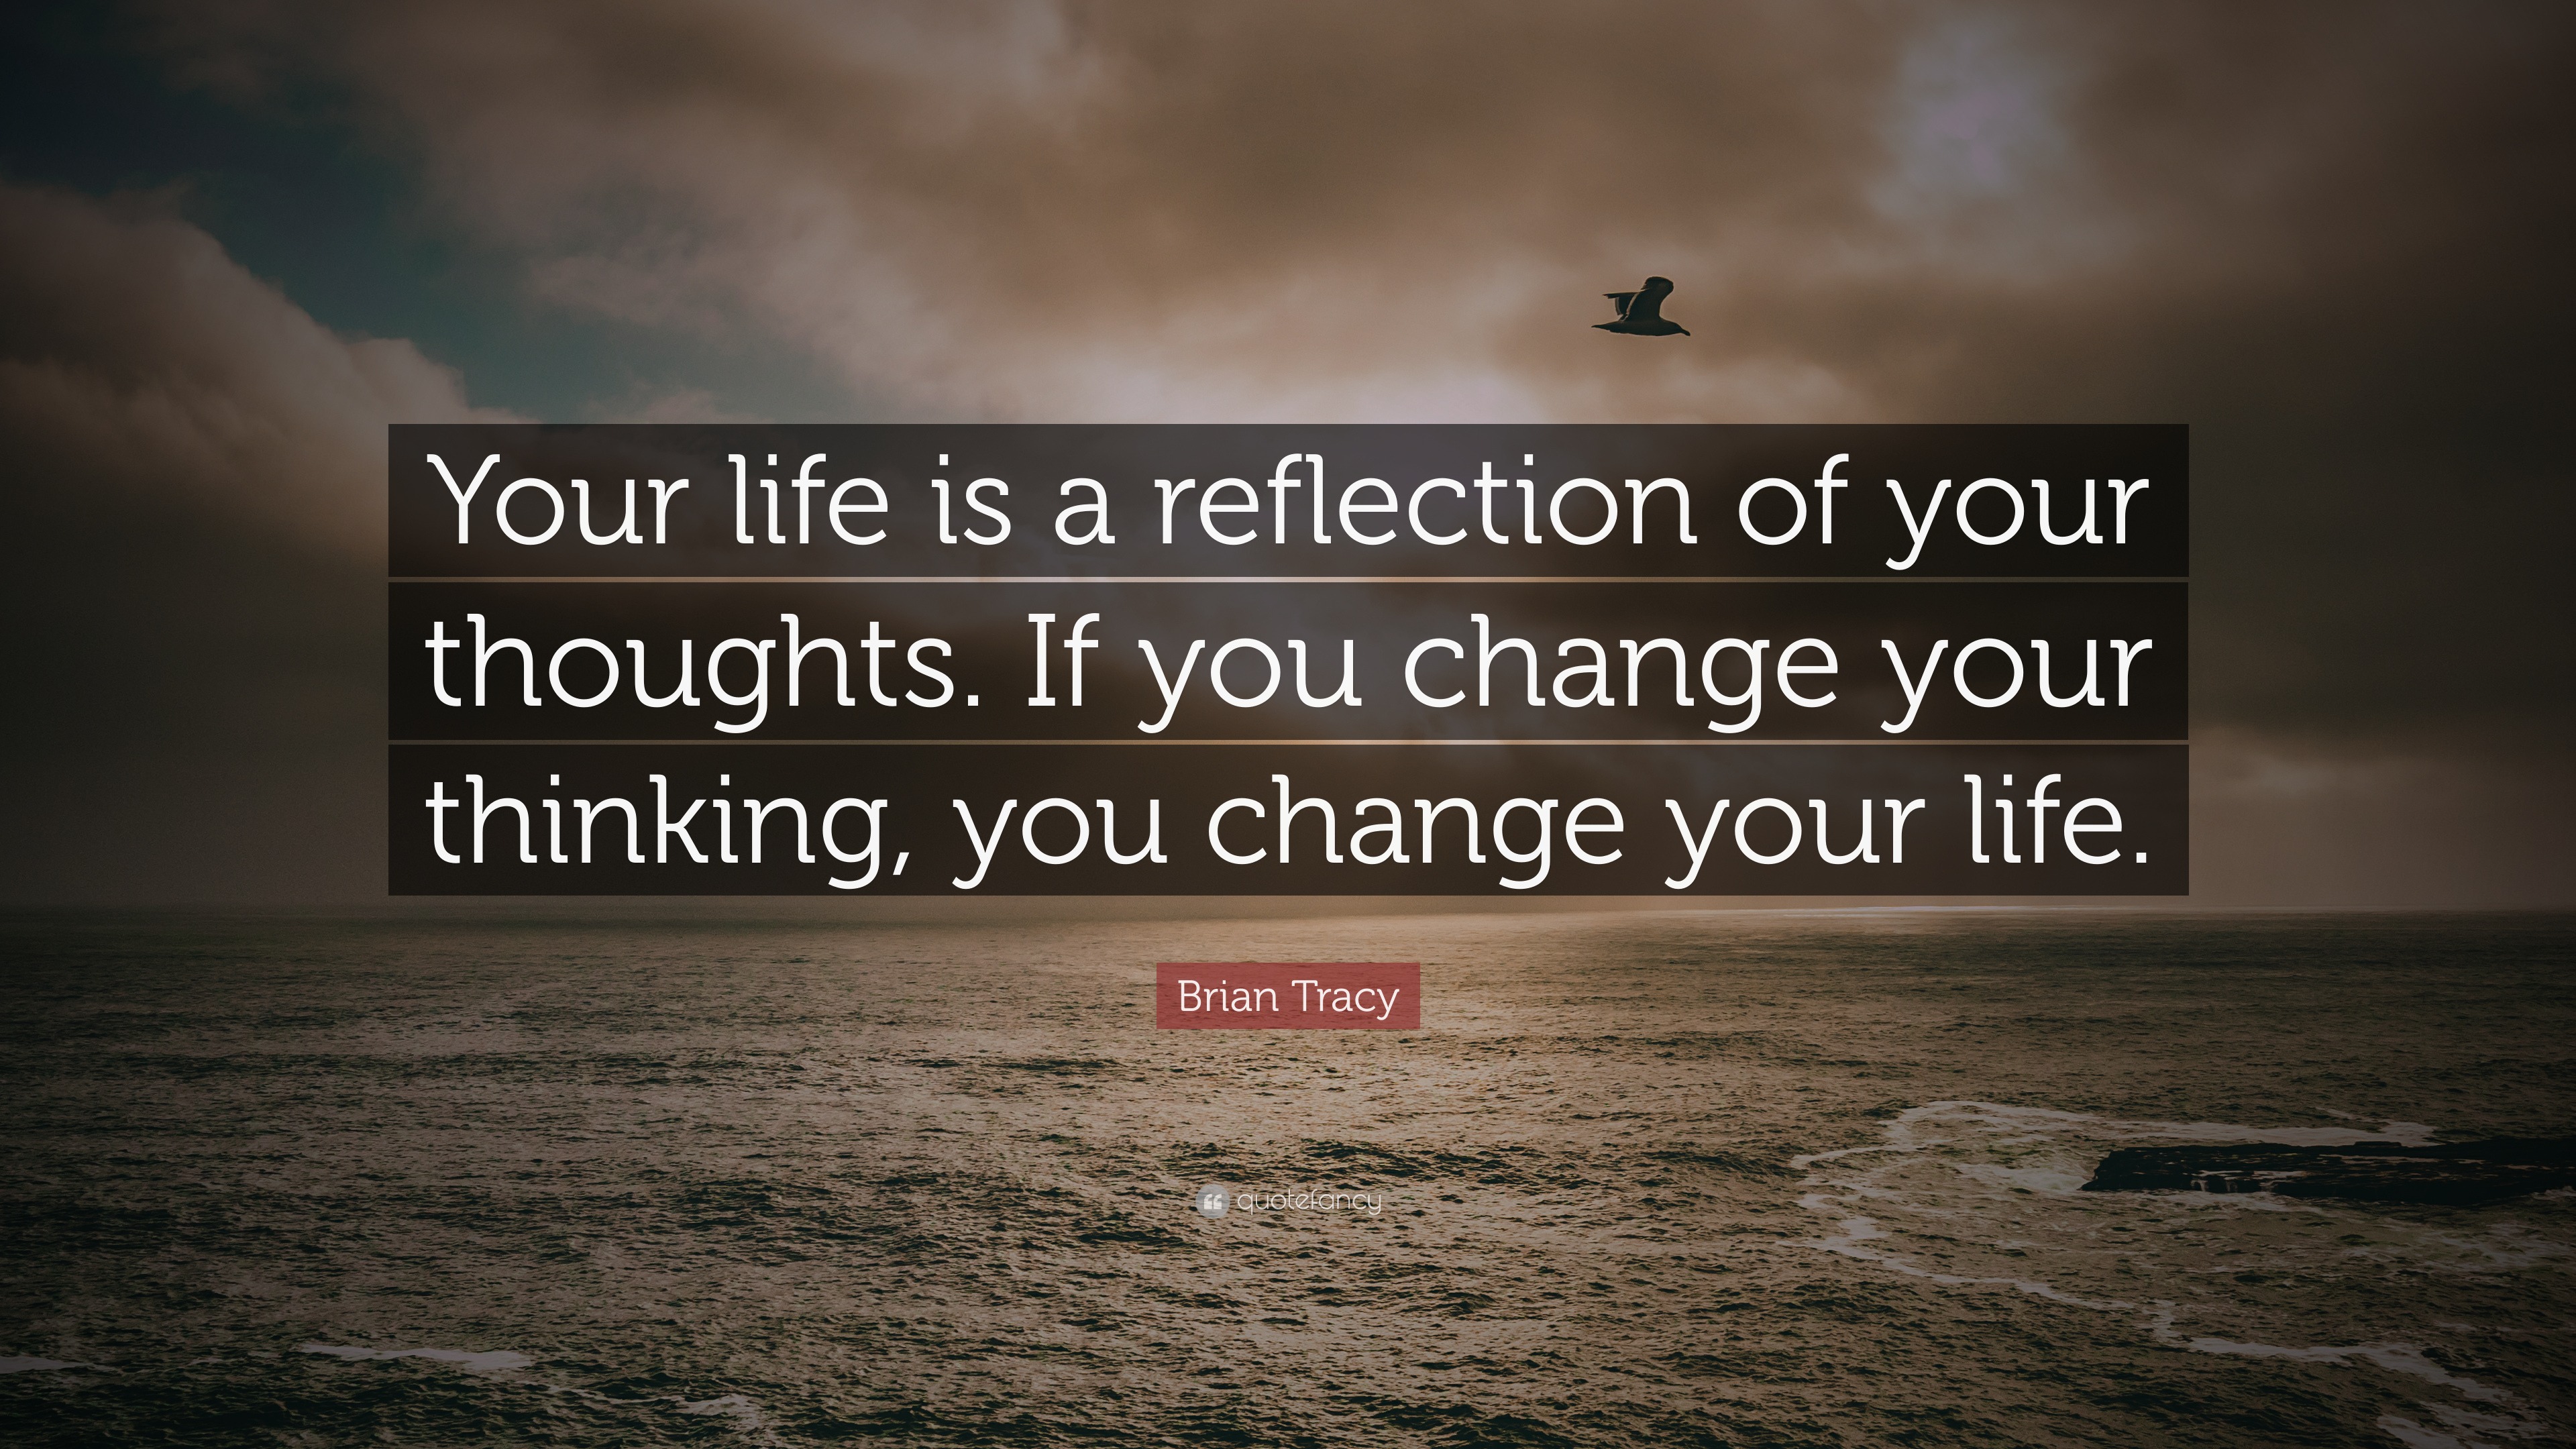 Brian Tracy Quote “Your life is a reflection of your